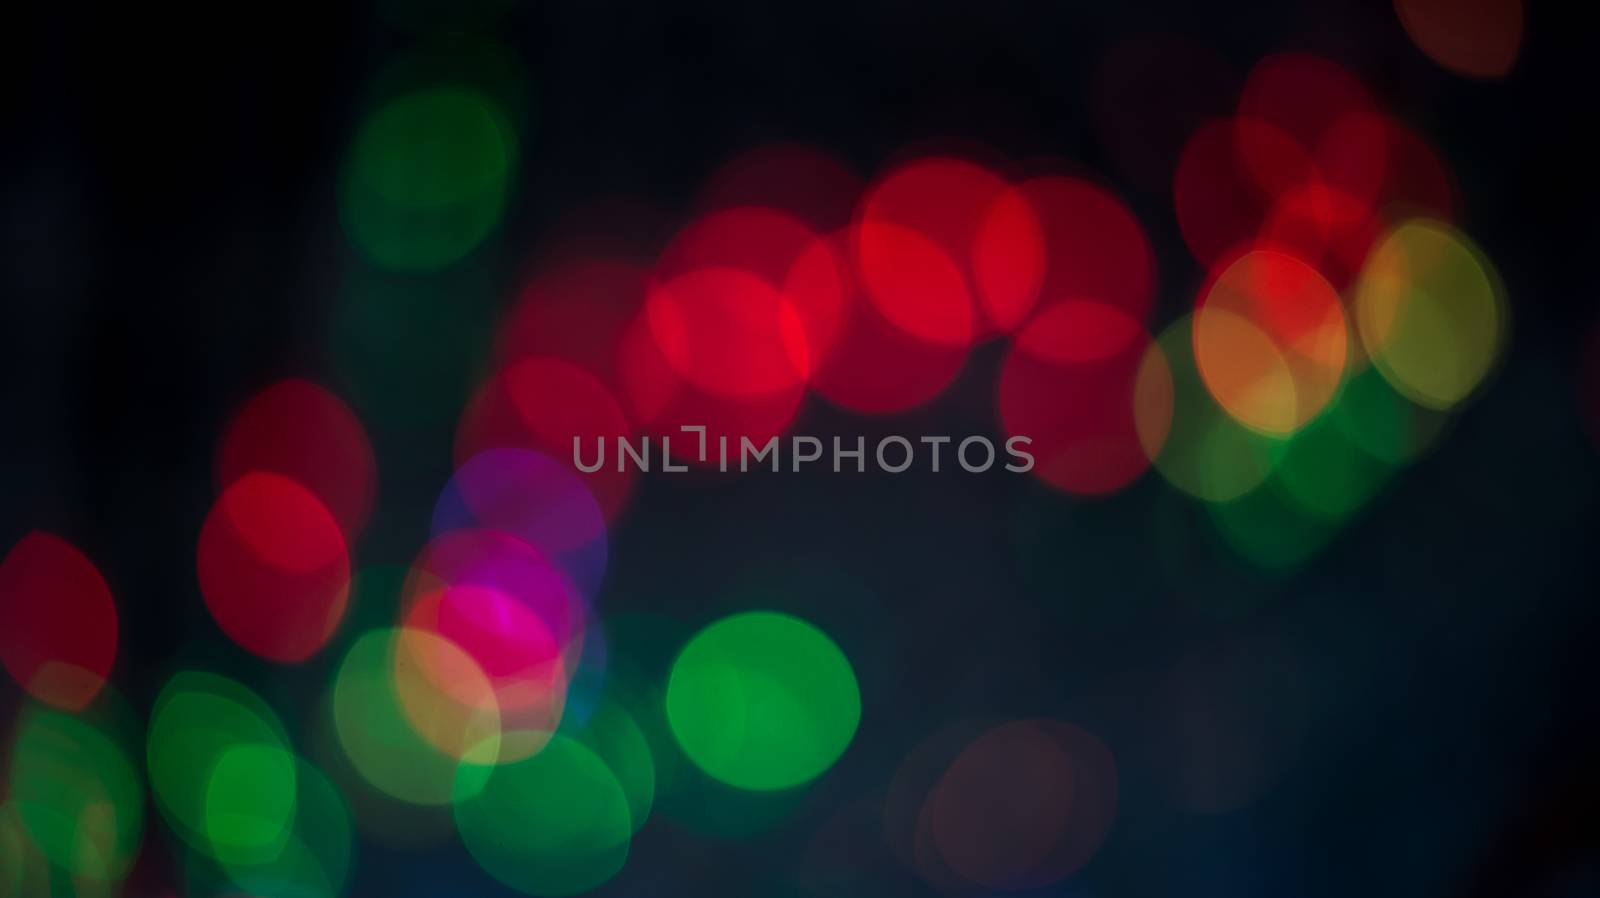 Artistic style - Defocused urban abstract texture background for by chanwity